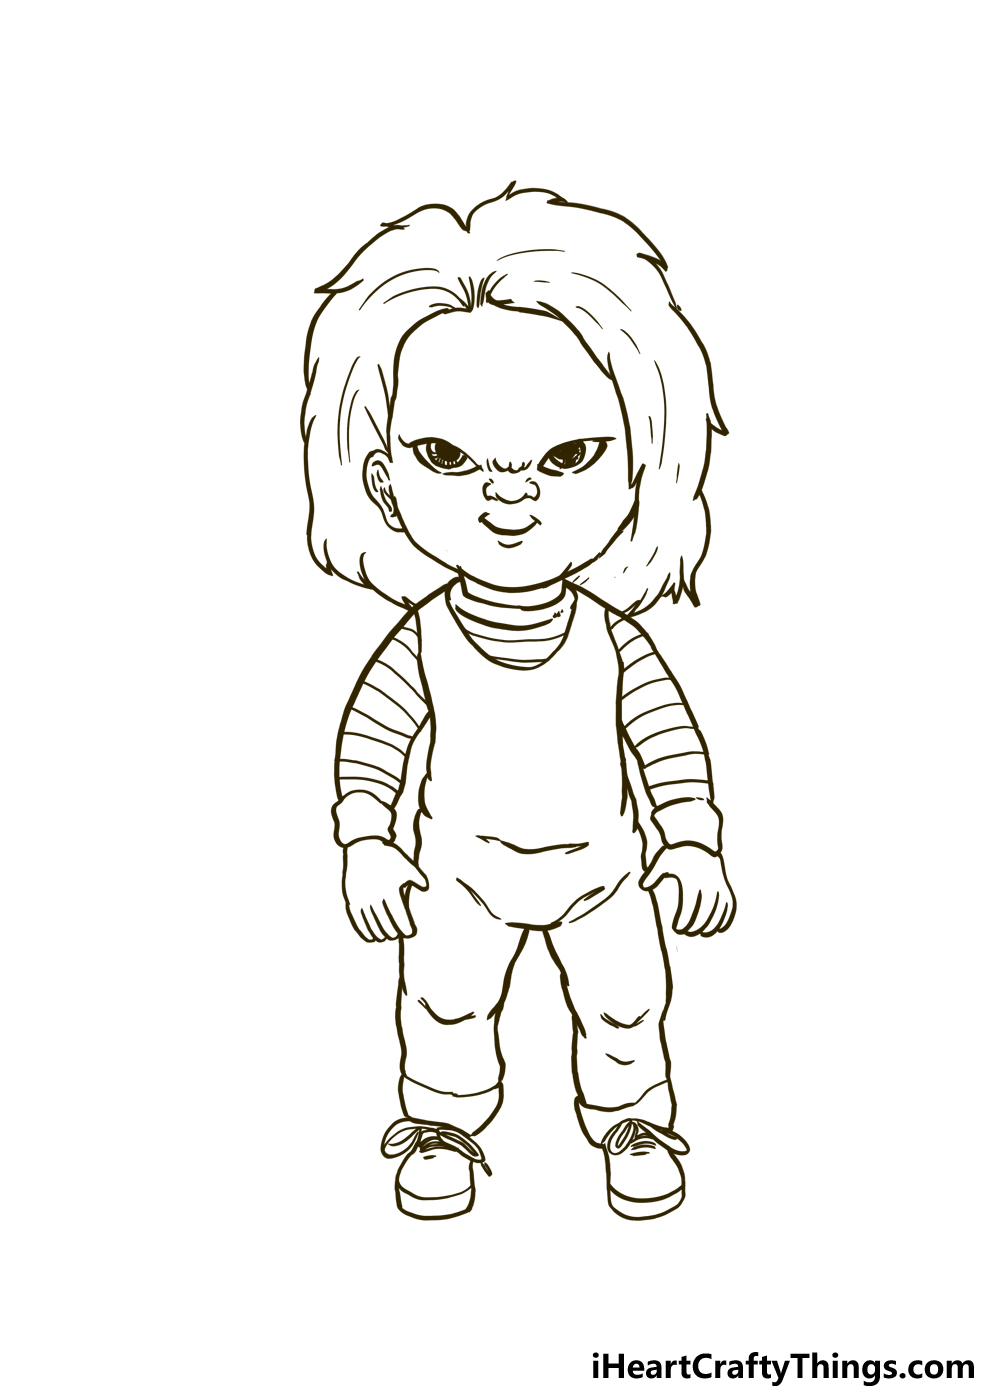 How to Draw Chucky step 5